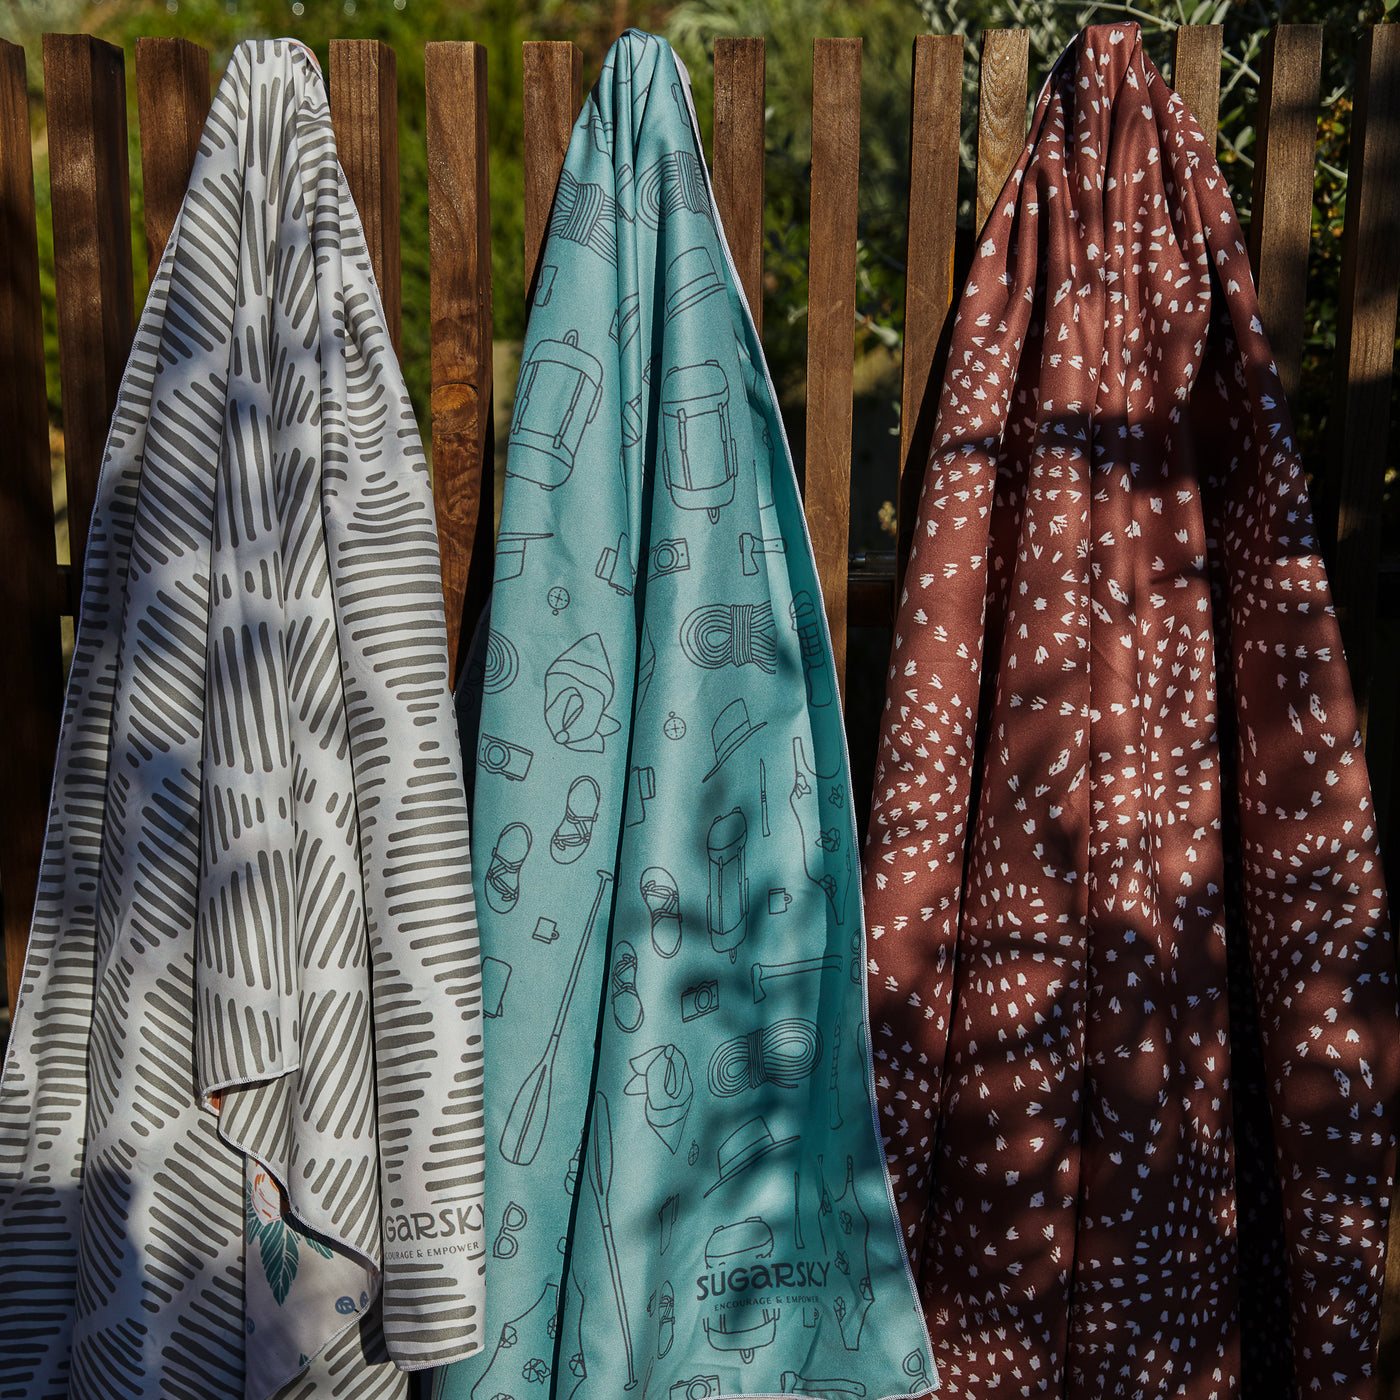 Awesome Blossom / Natural Lava Lamps Blanket Towel